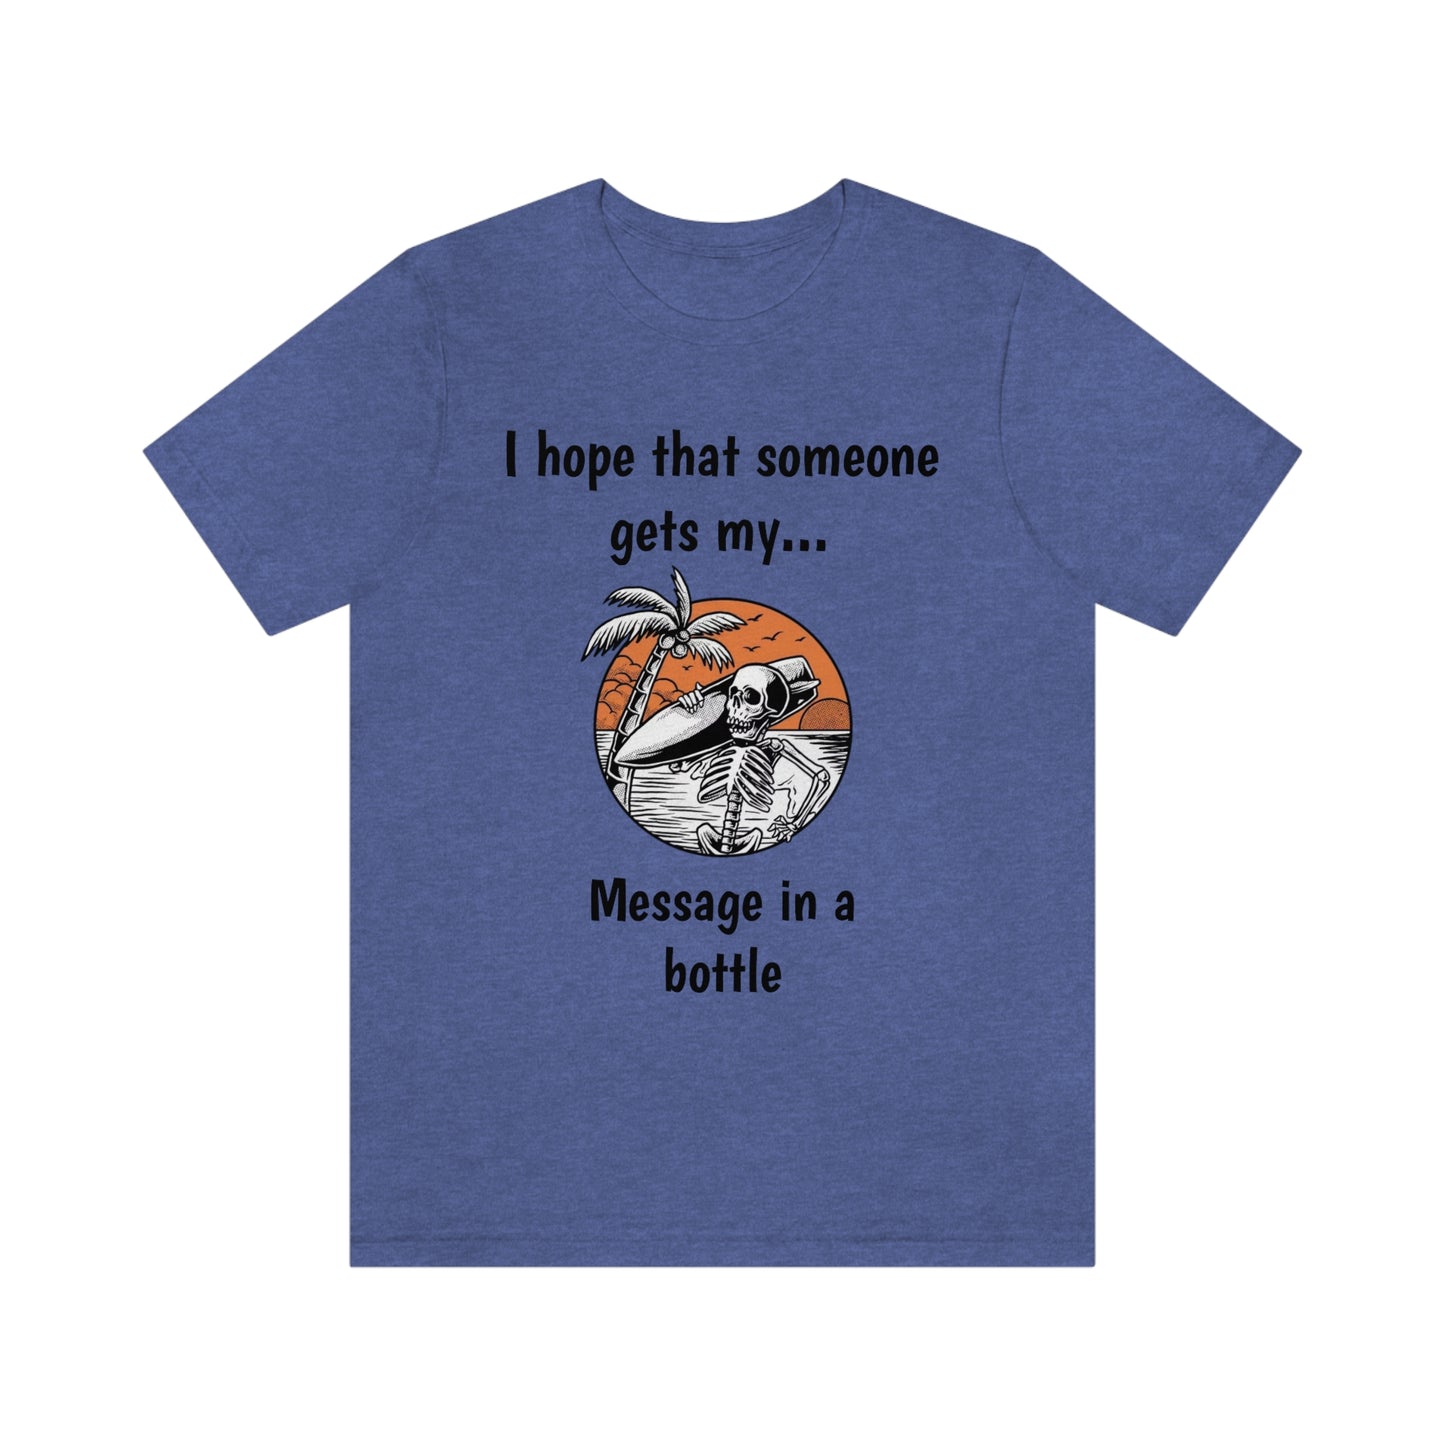 I hope that someone gets my message in a bottle - Fan Shirt - Unisex Short Sleeve Tee - CrazyTomTShirts